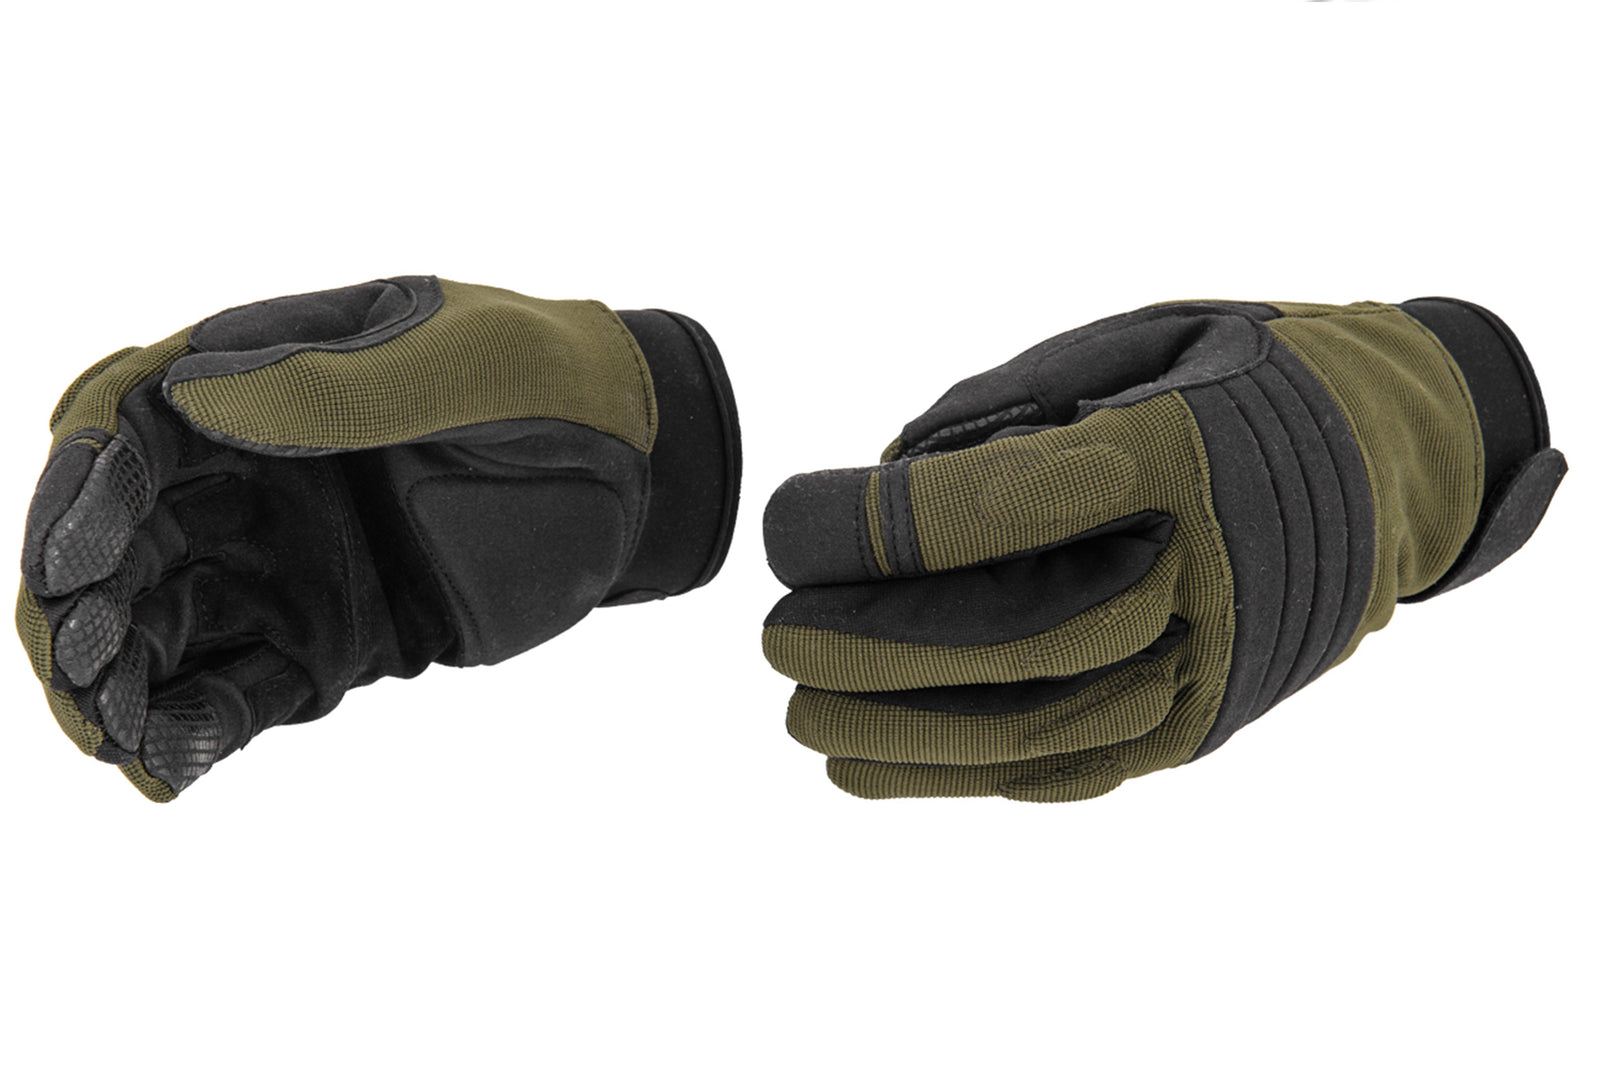 Rothco Carbon Fiber Hard Knuckle Cut/Fire Resistant Gloves